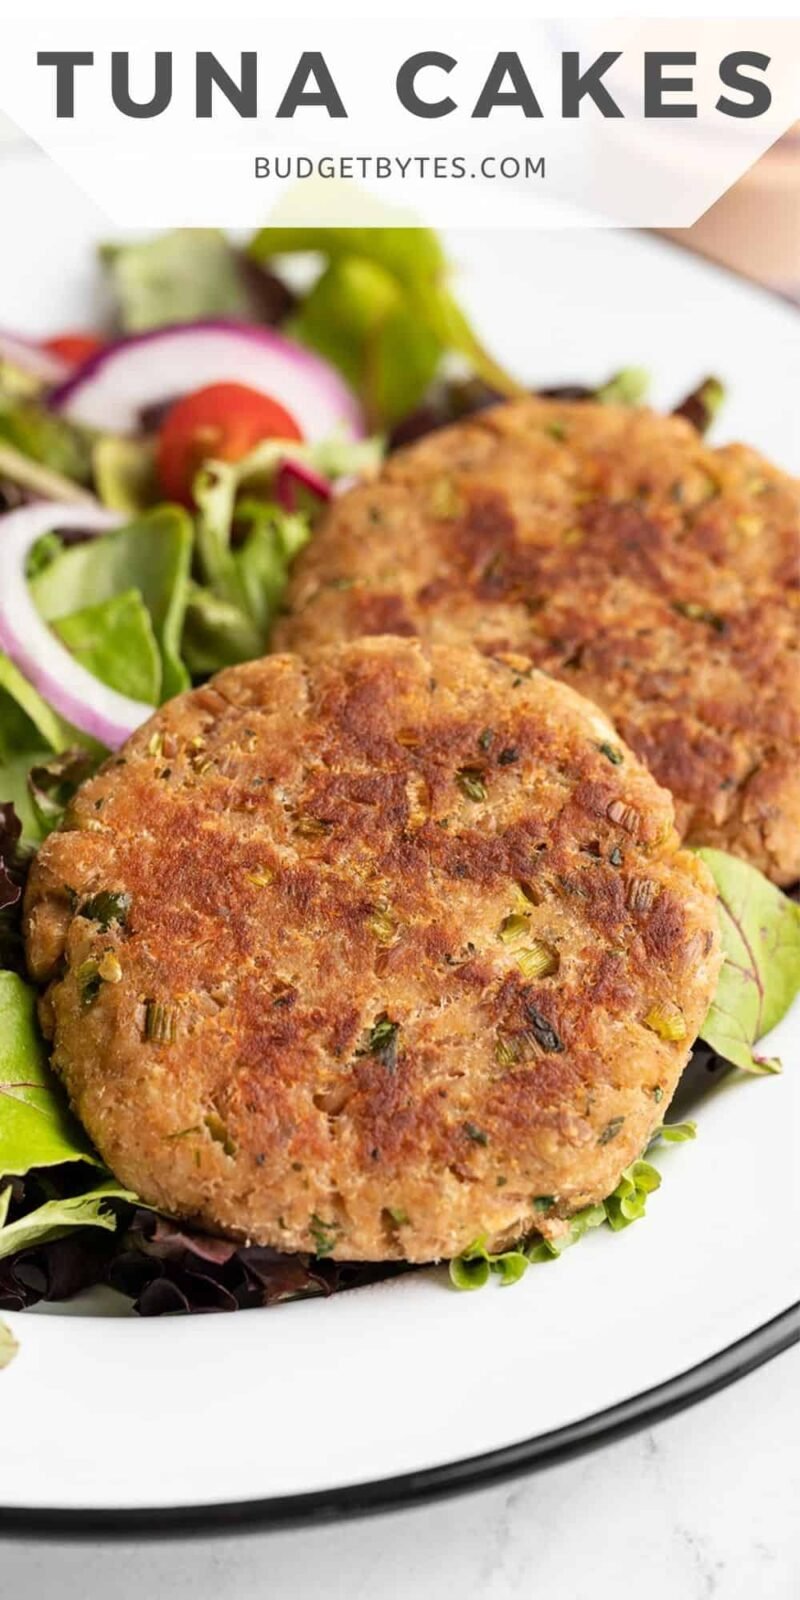 Close up side view of two tuna cakes on a plate with greens